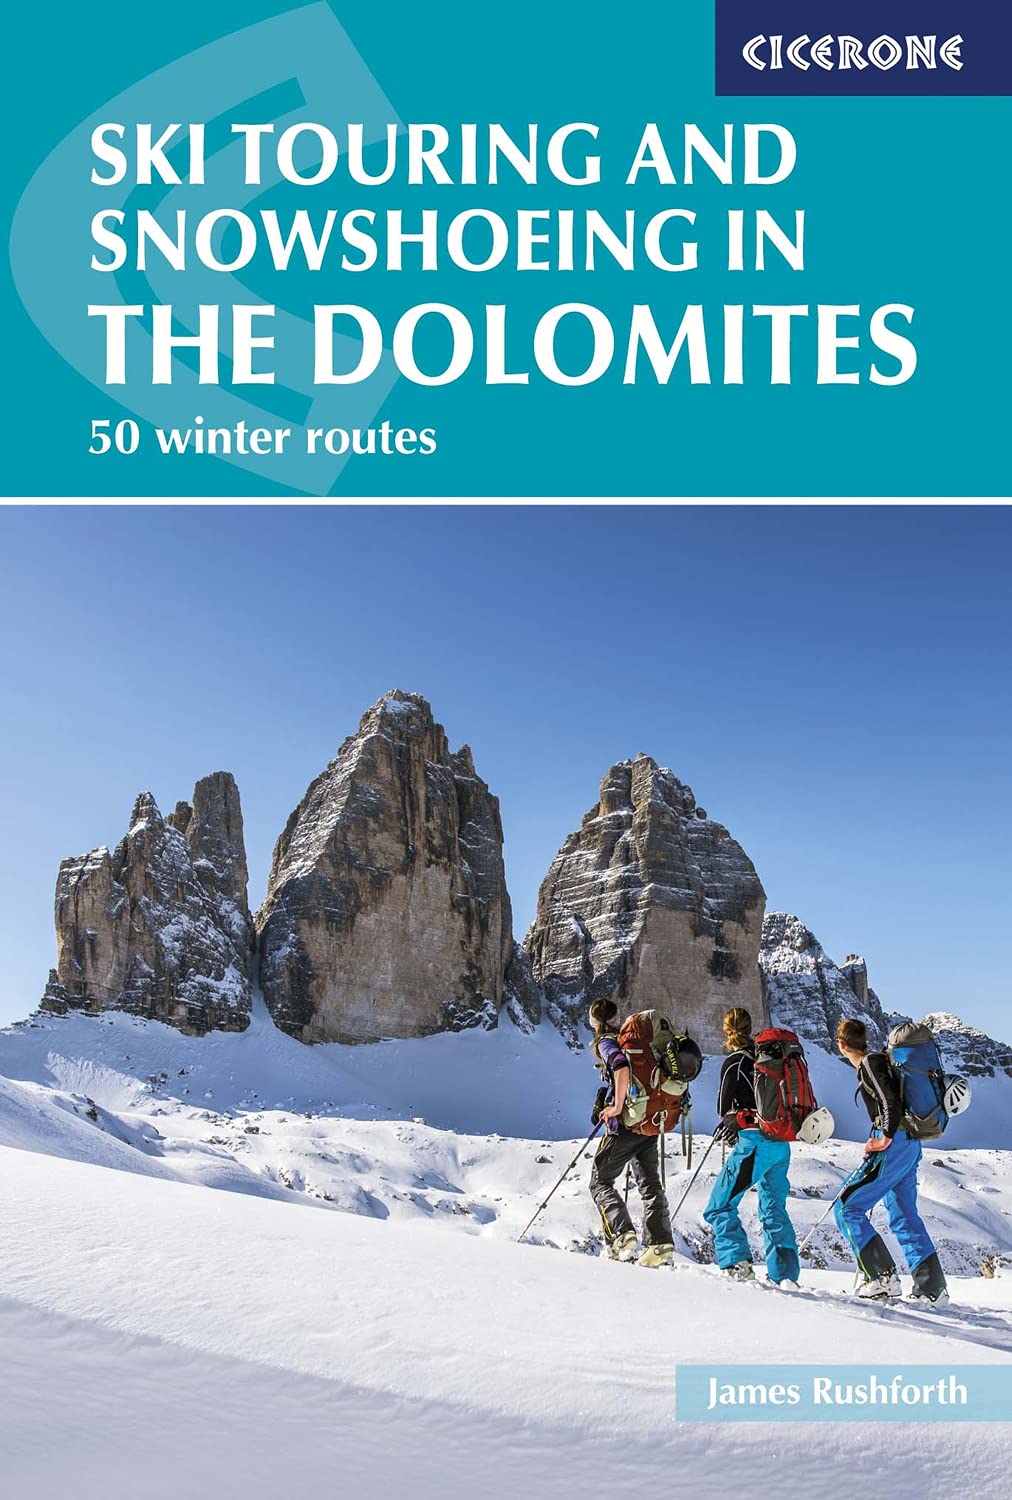 Dolomites Ski Touring and Snowshoeing in the